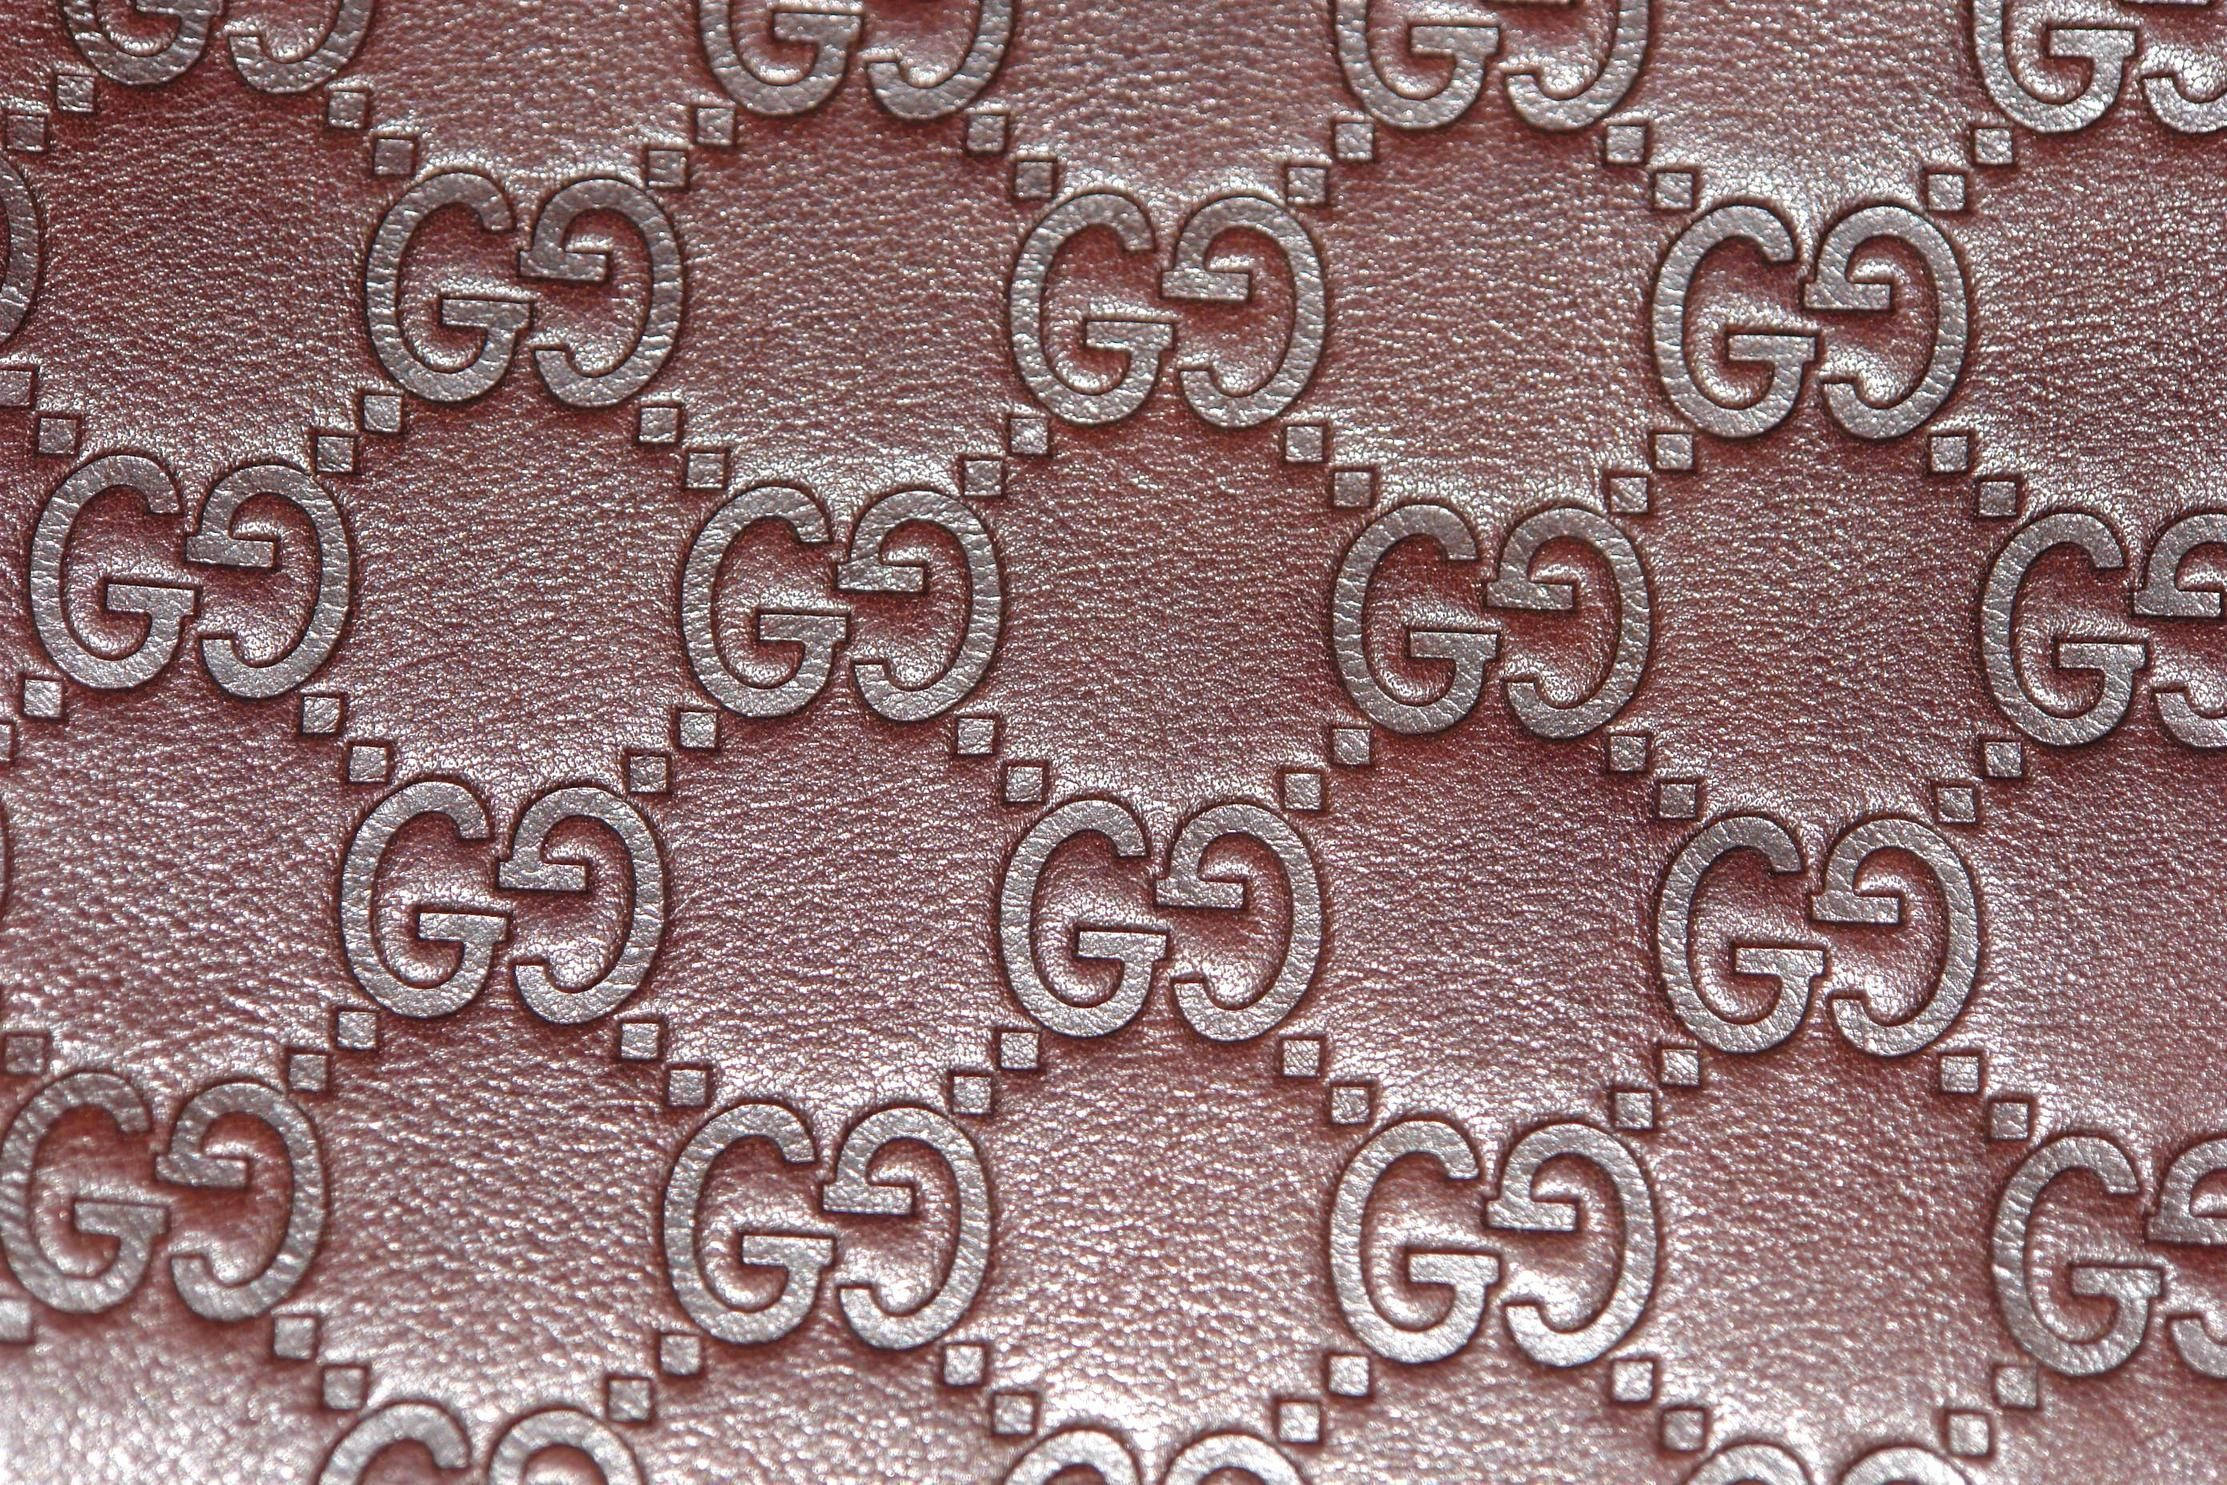 Gucci Ggs Leather - Gucci Ggs Leather Background